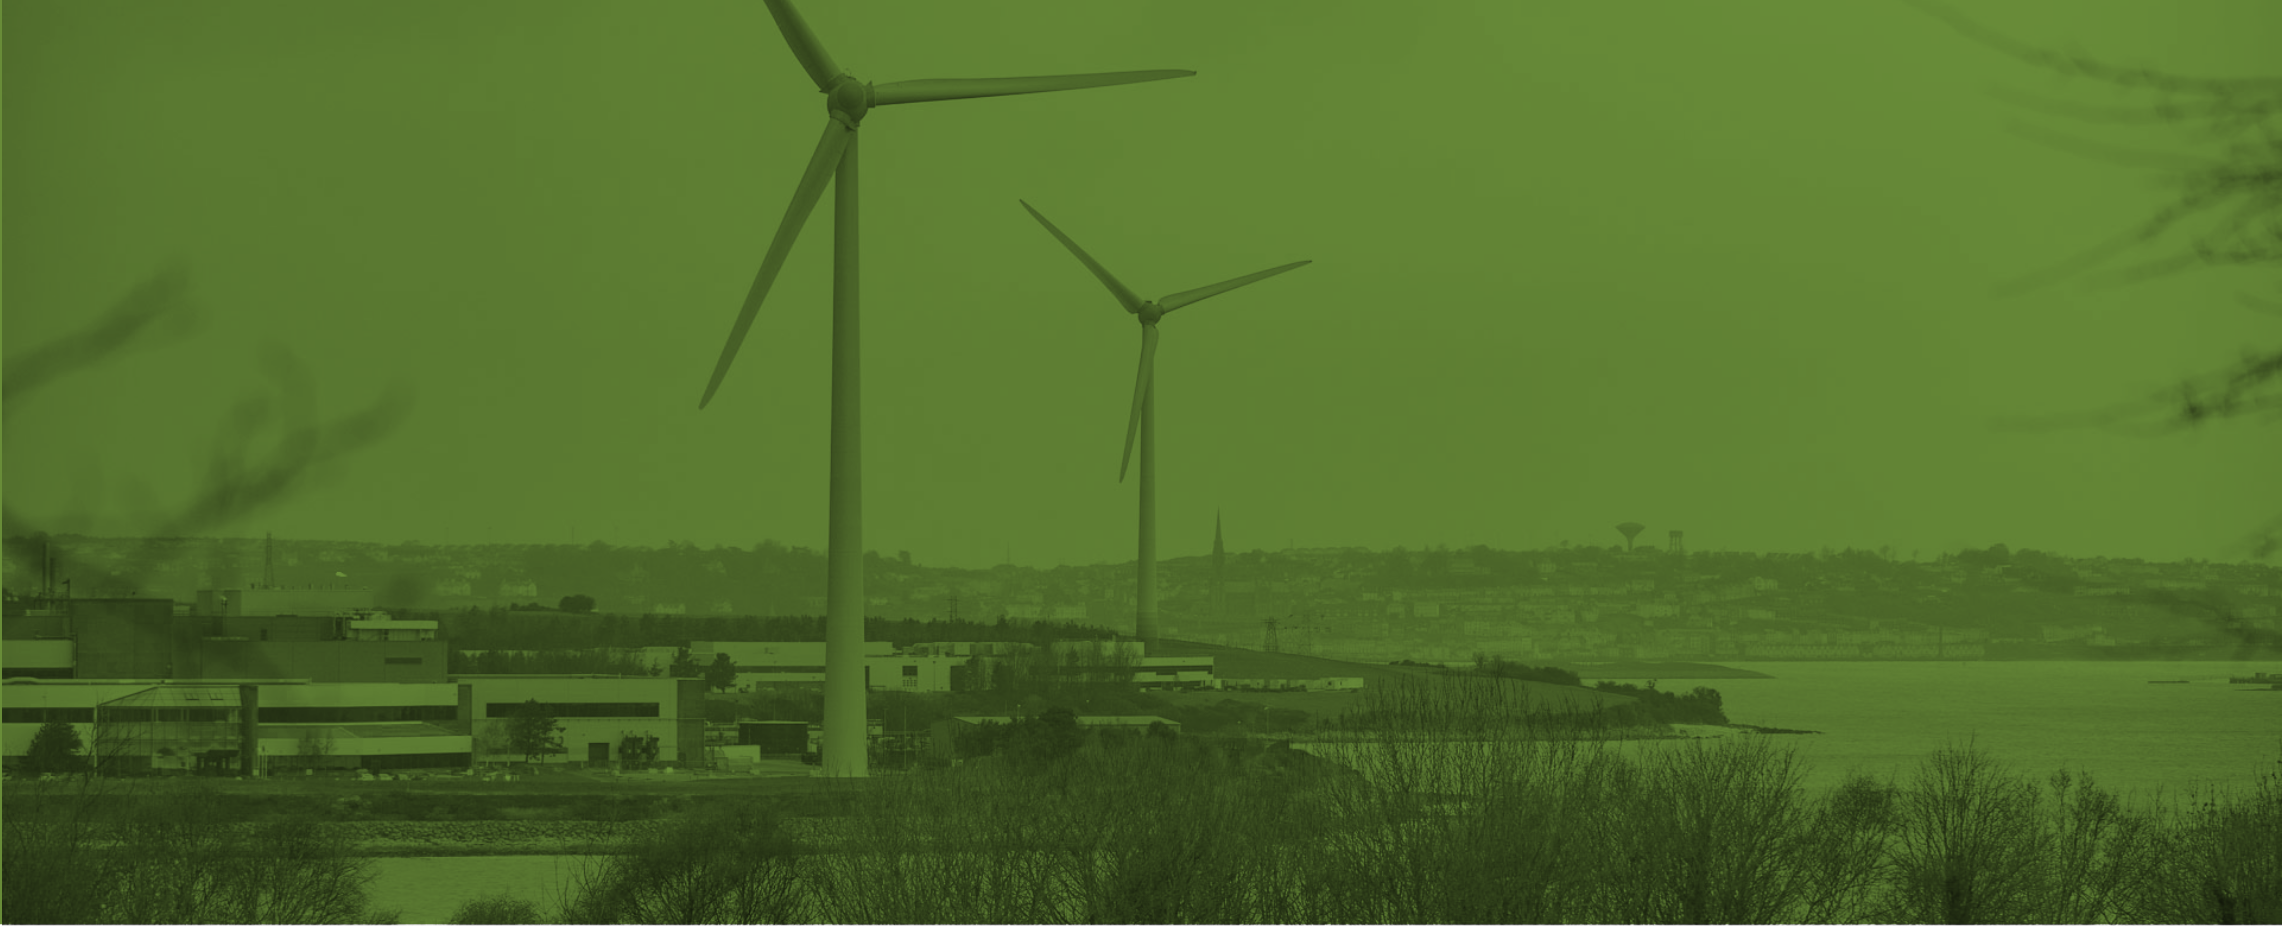 Windmills and global sustainability initiatives